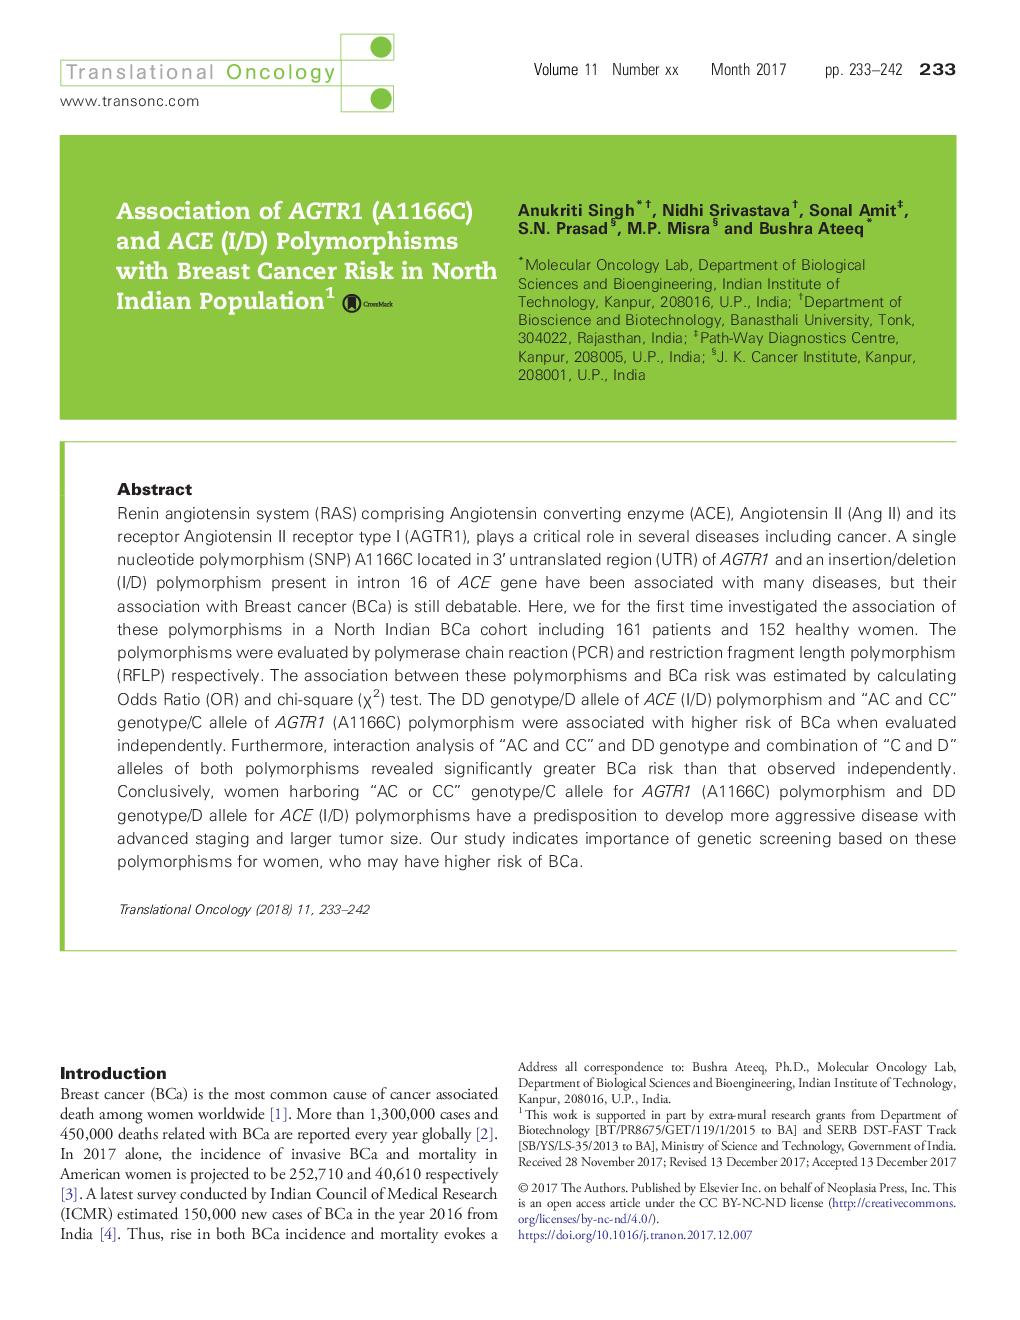 Association of AGTR1 (A1166C) and ACE (I/D) Polymorphisms with Breast Cancer Risk in North Indian Population